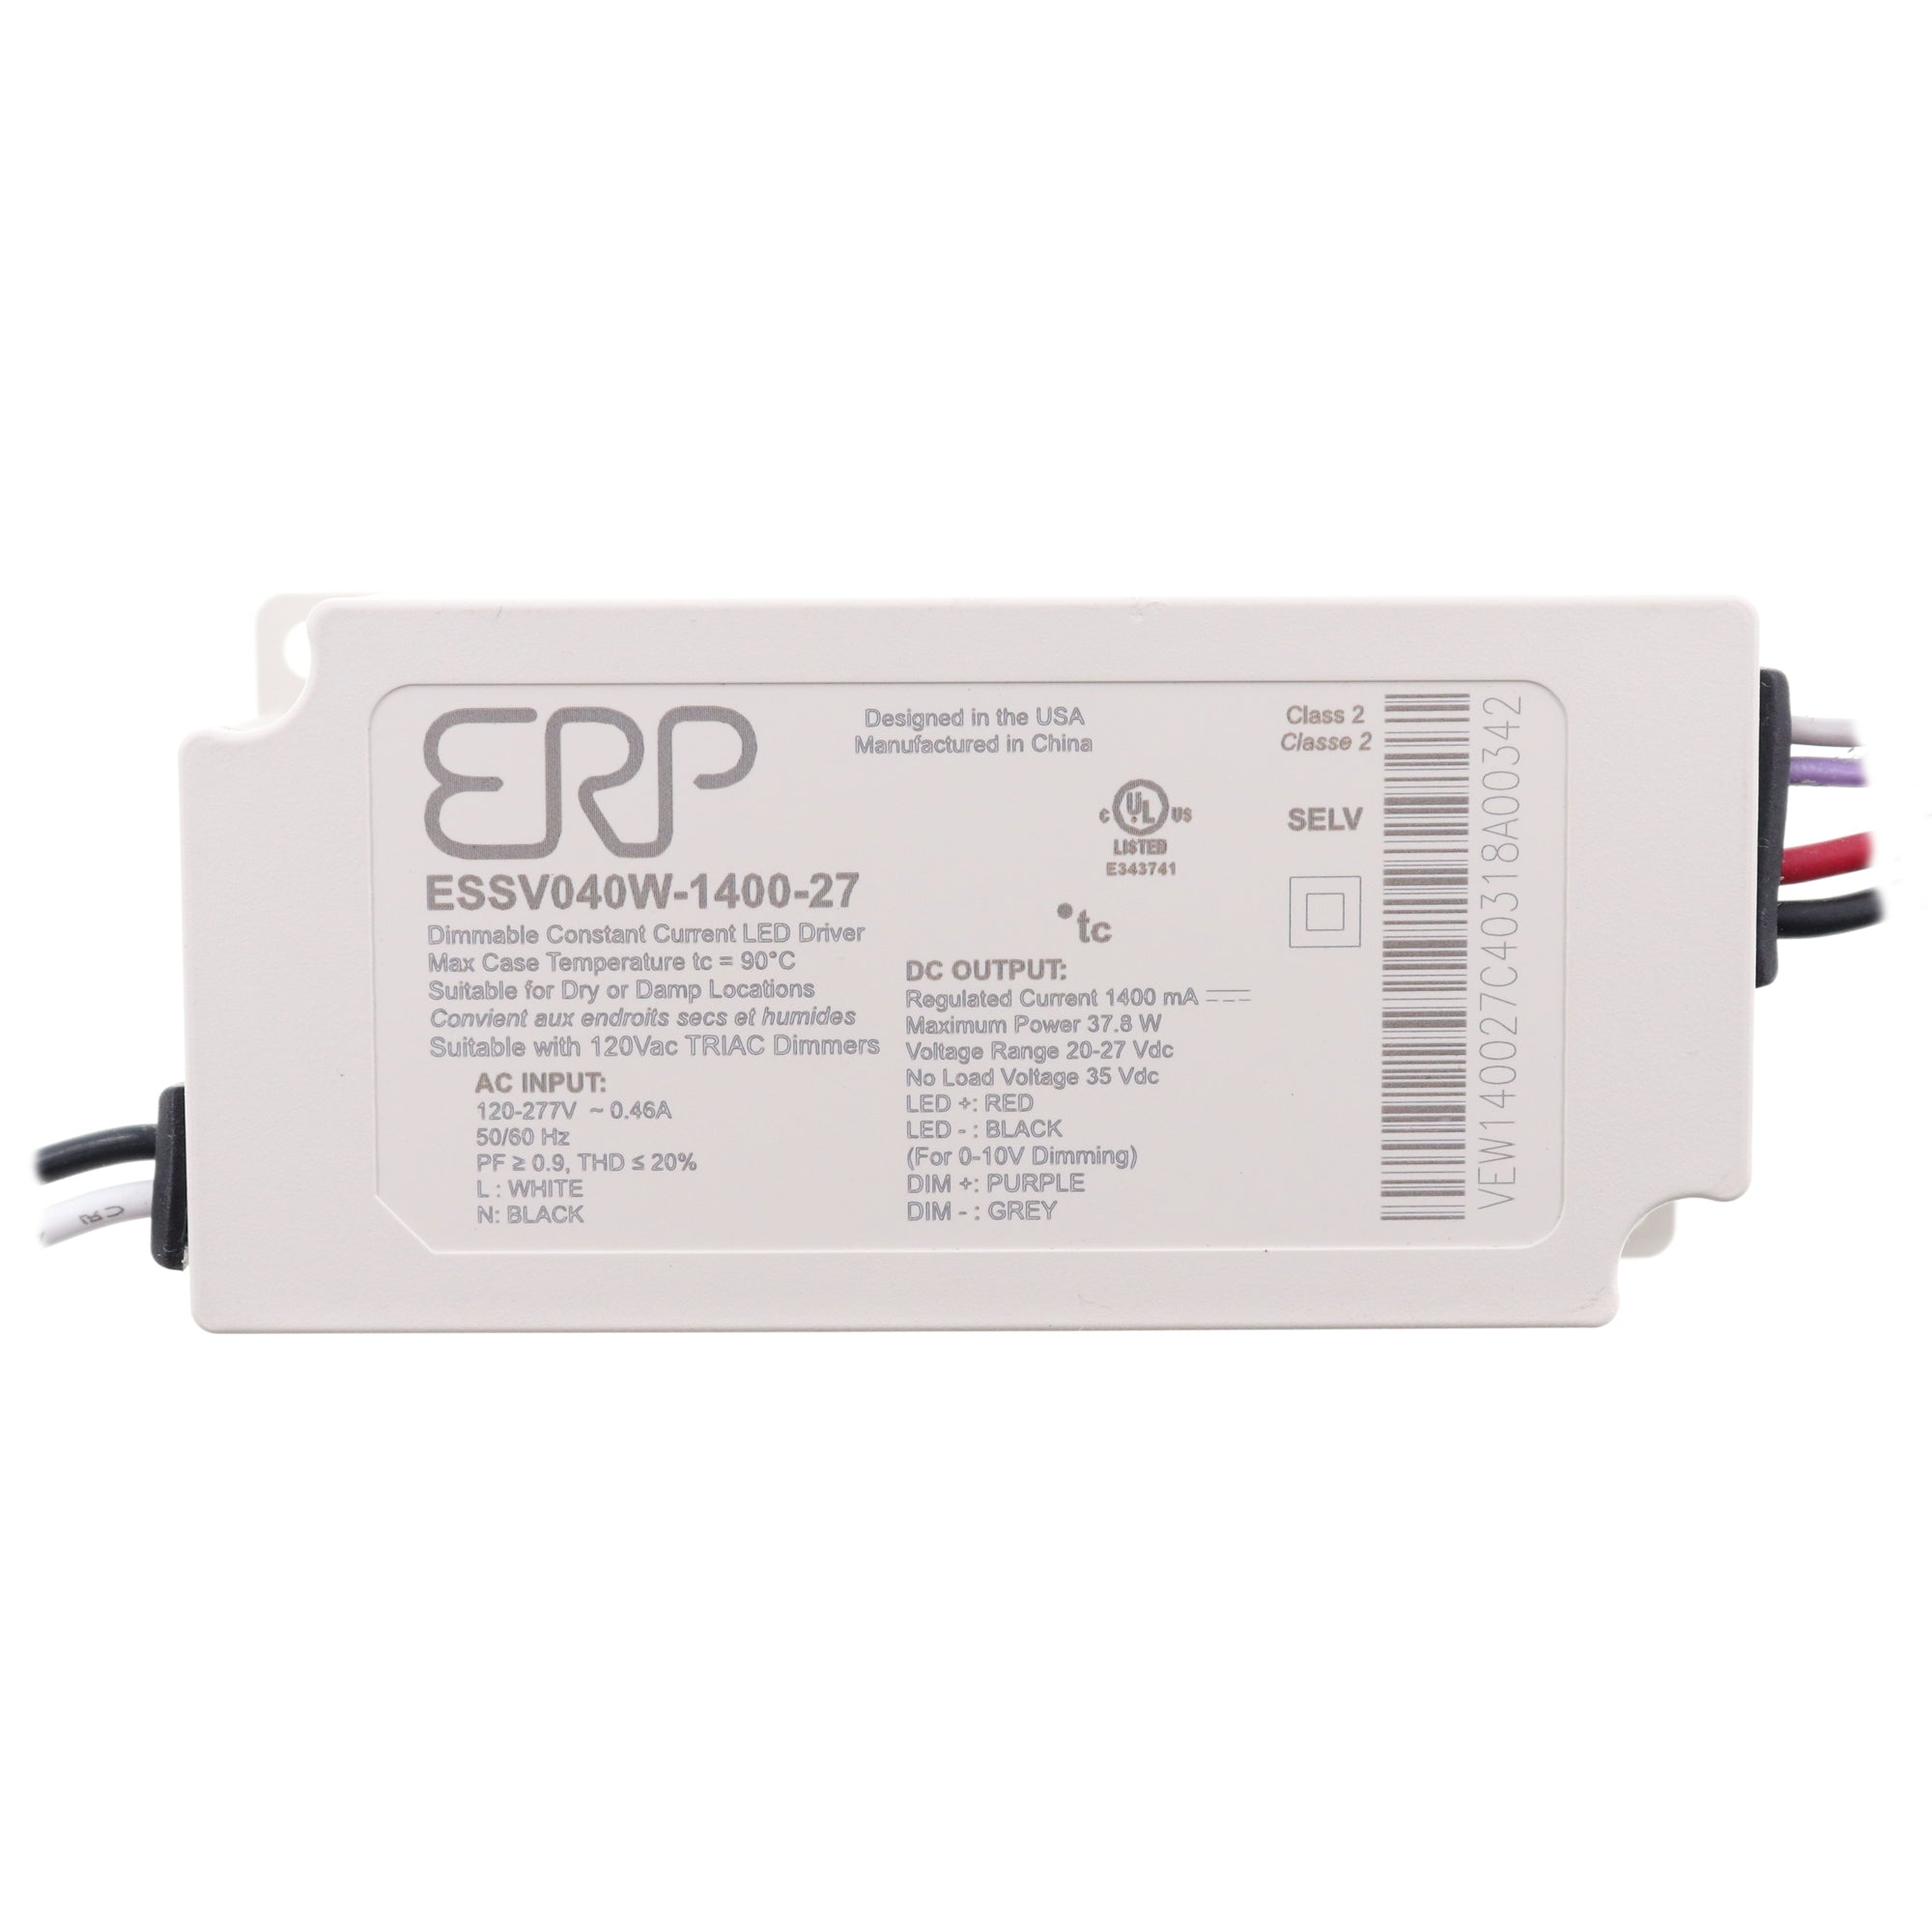 ERP, ERP ESSV040W-1400-27 DIMMABLE CONSTANT CURRENT LED DRIVER, 1400MA, 38W, 20-27VDC